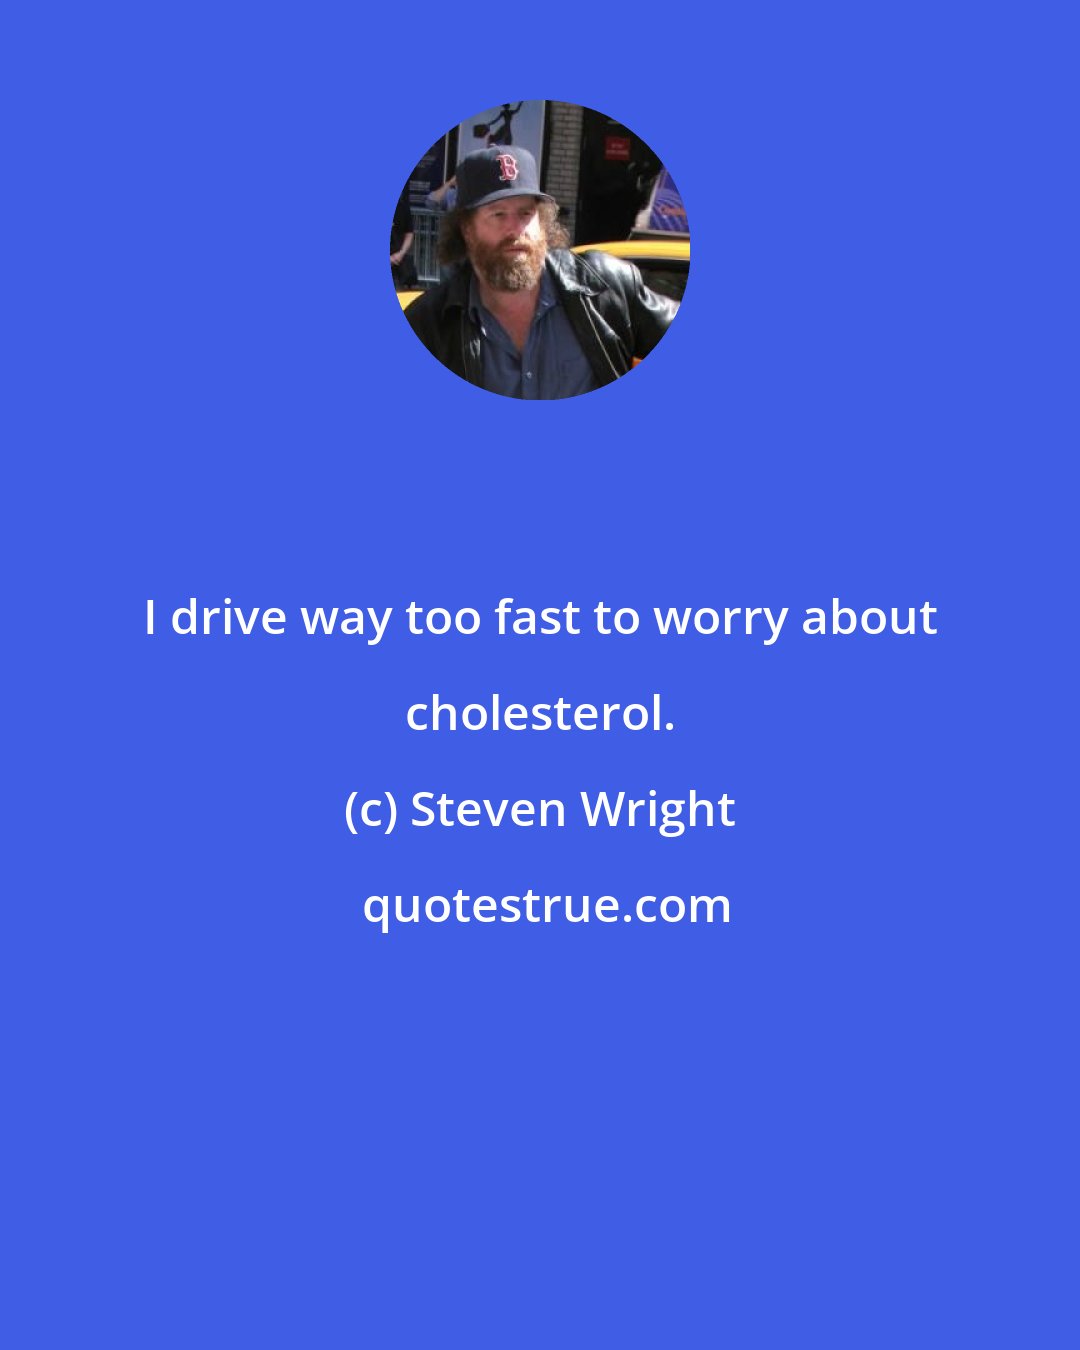 Steven Wright: I drive way too fast to worry about cholesterol.